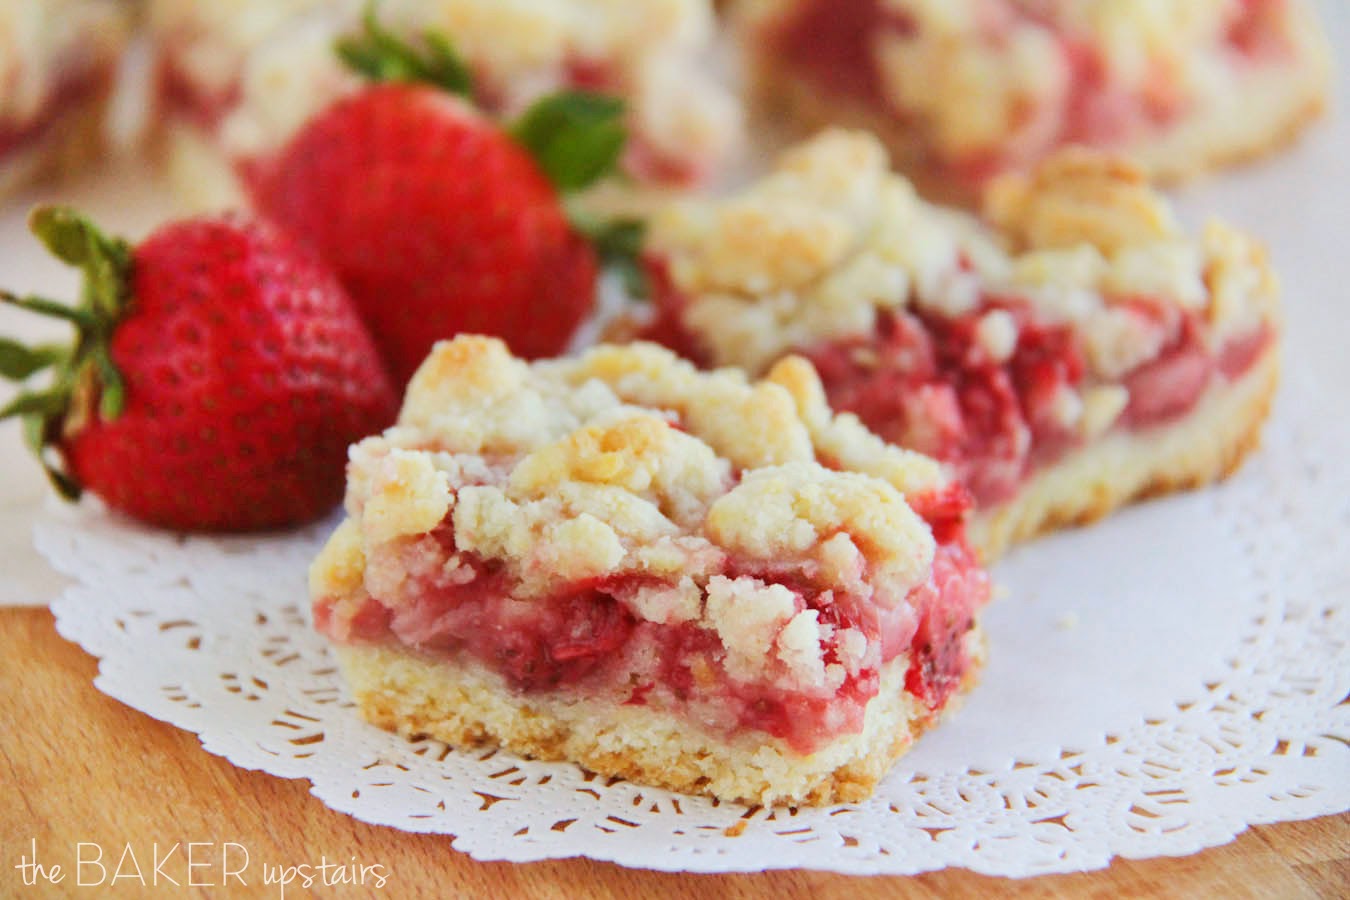 These sweet and irresistible strawberry crumb bars are the perfect spring dessert!